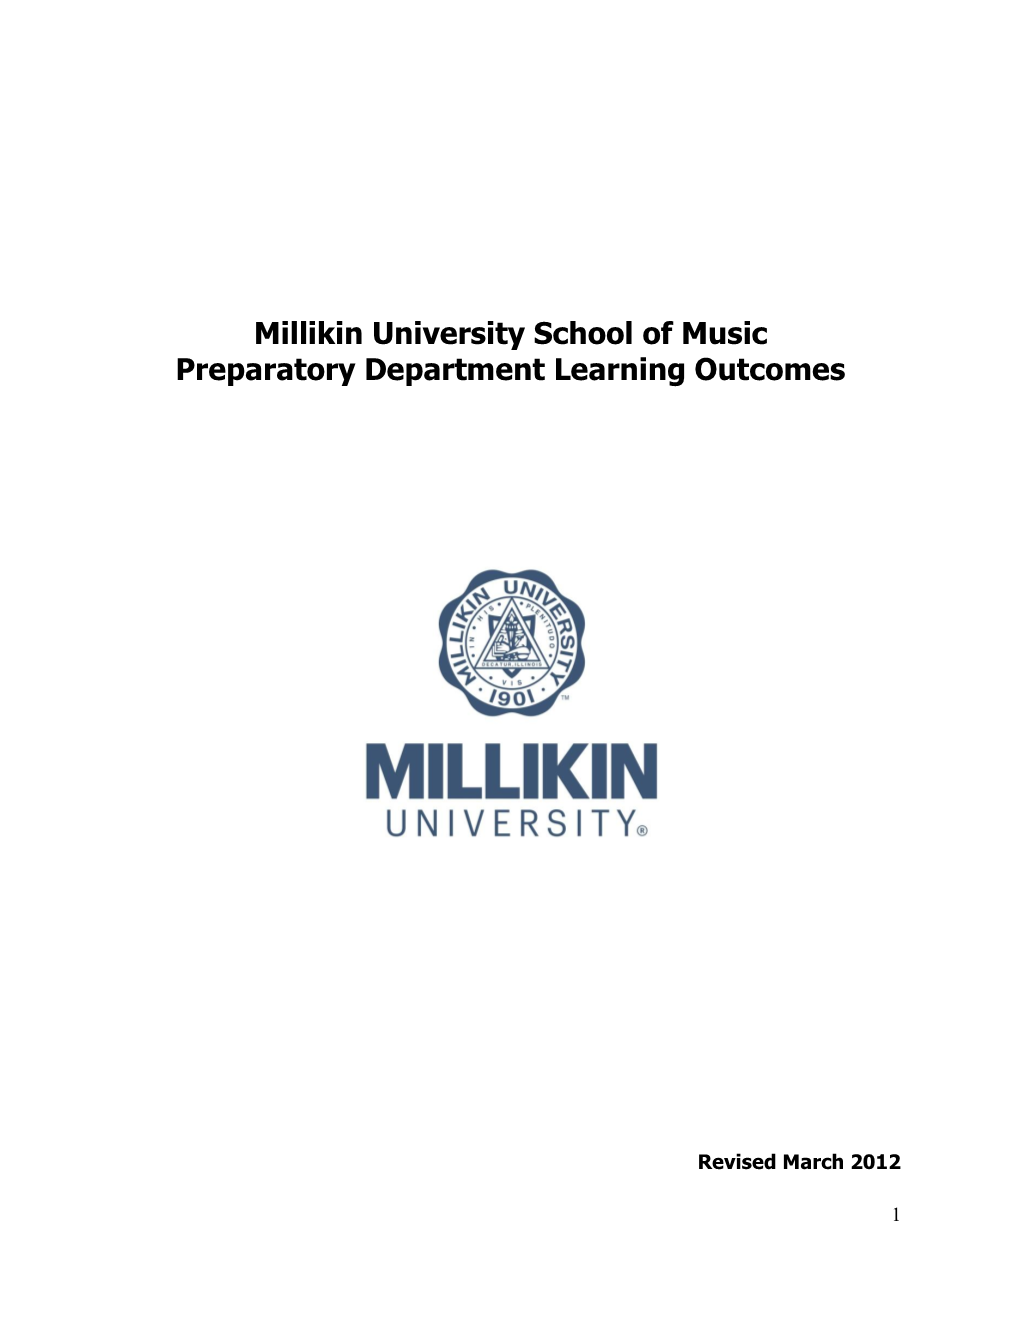 Millikin University School of Music Preparatory Department Learning Outcomes